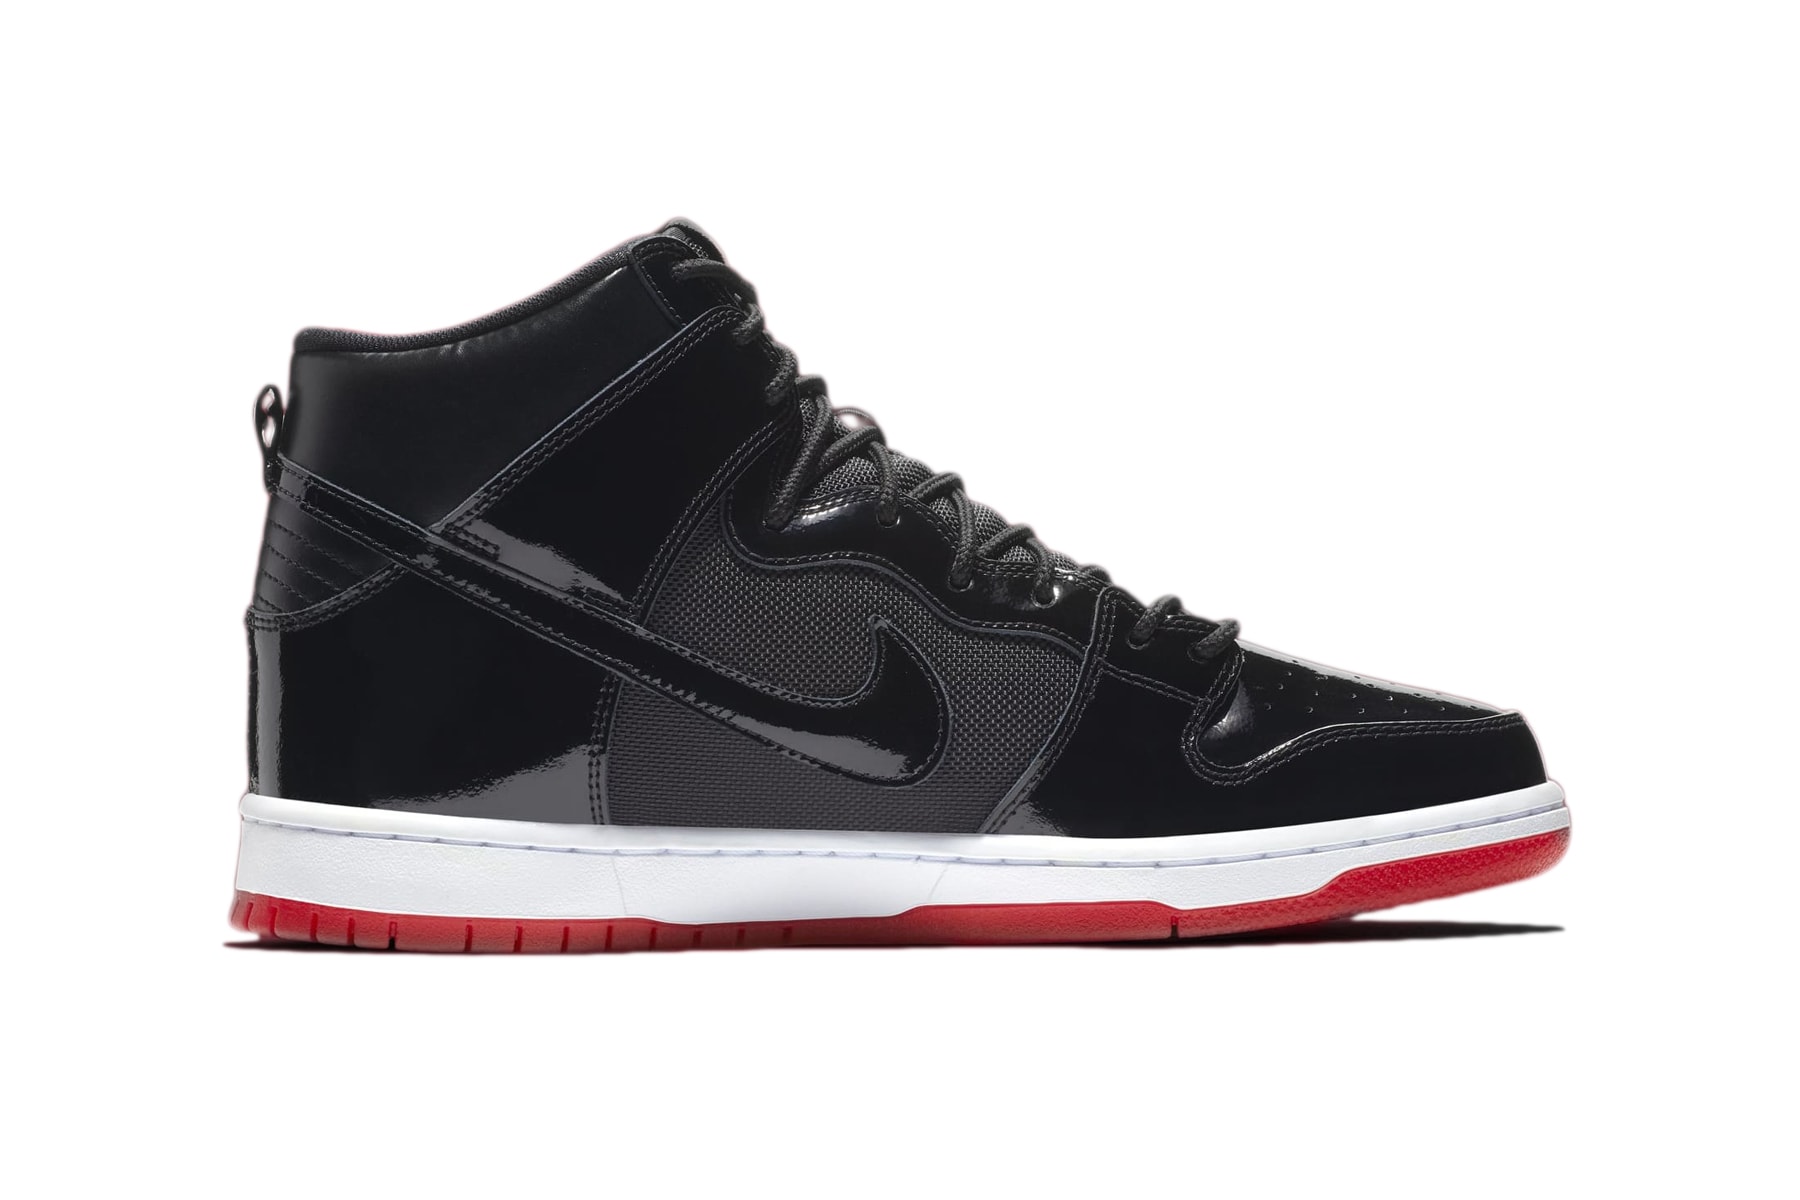 Nike SB Dunk High "Bred" Official Images Imagery Release Date